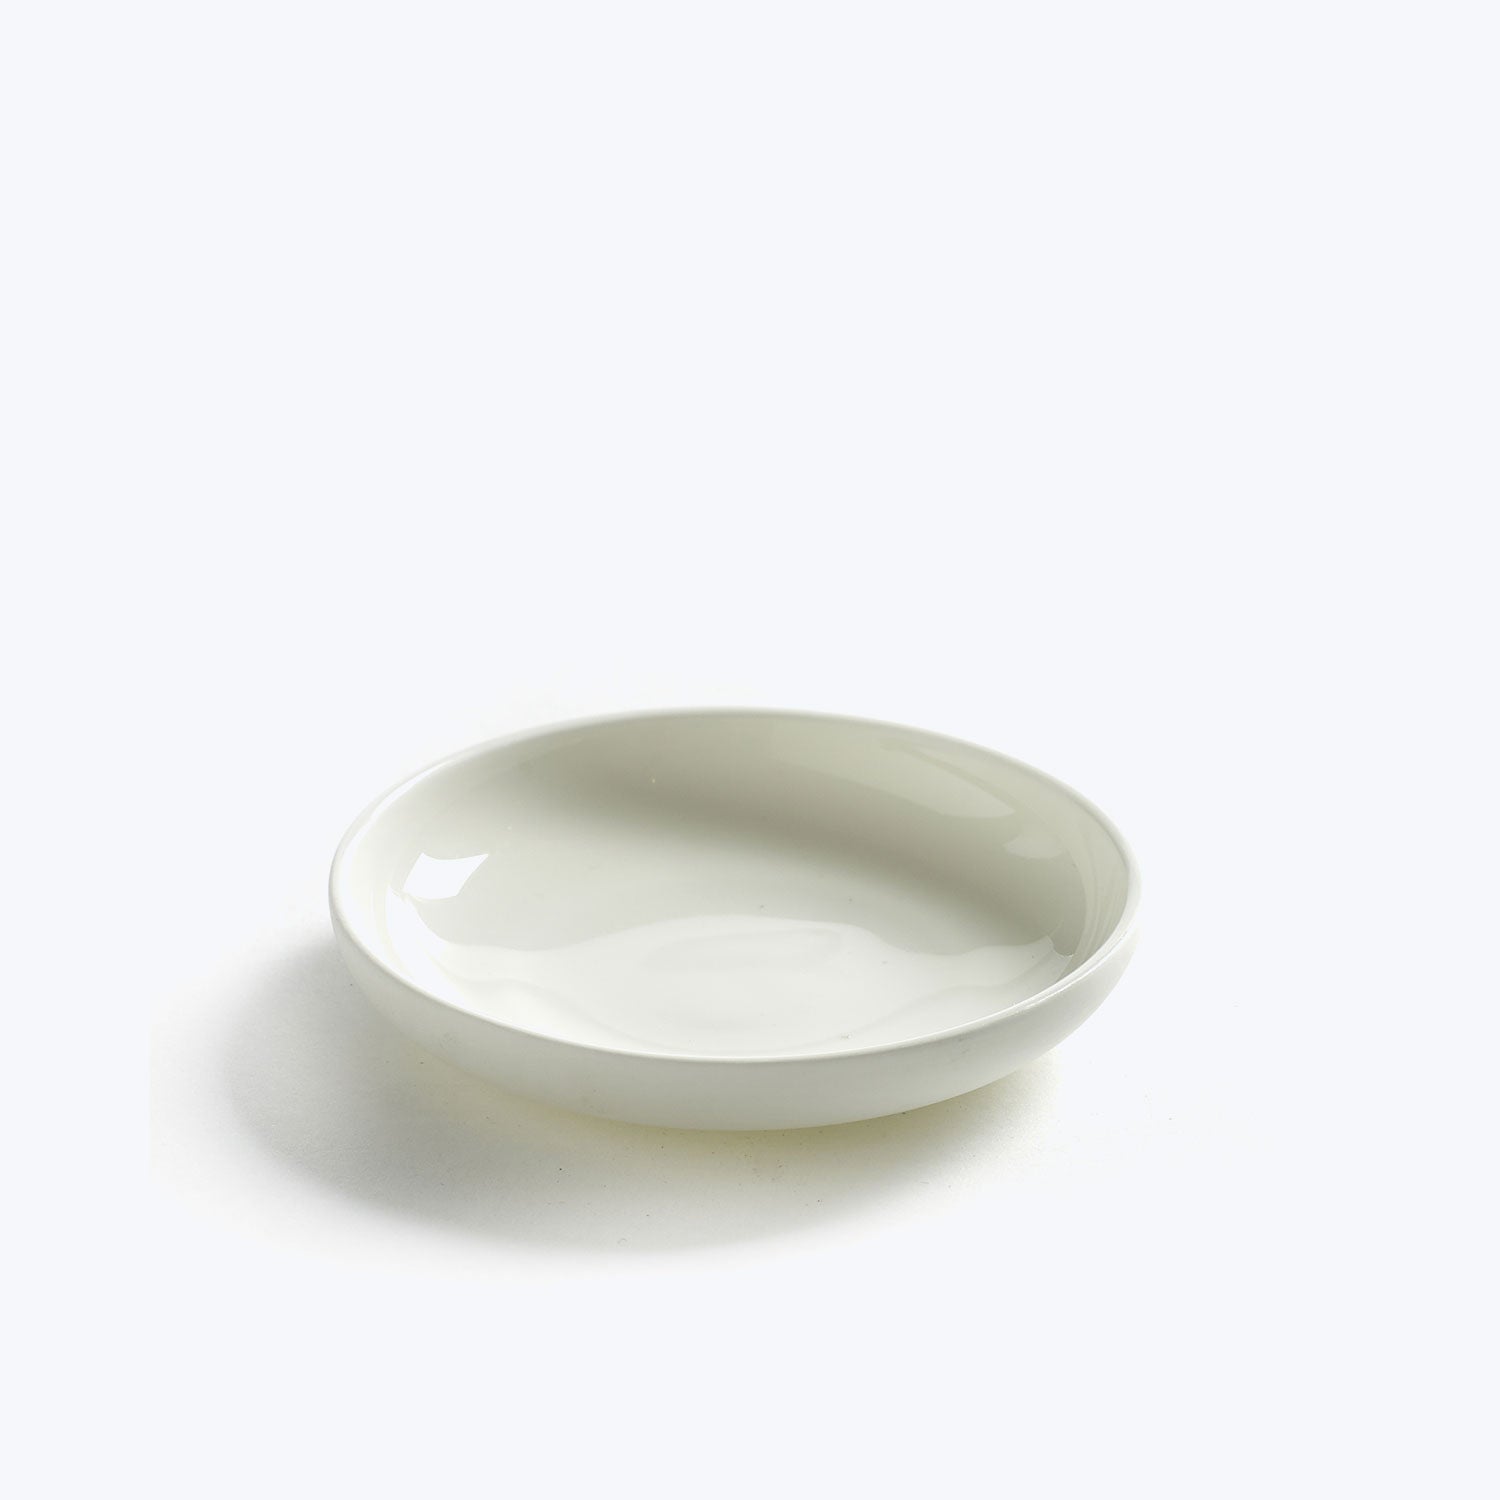 Piet Boon Base Tableware Collection-Glazed White-XLarge Bowl (Set of 4)